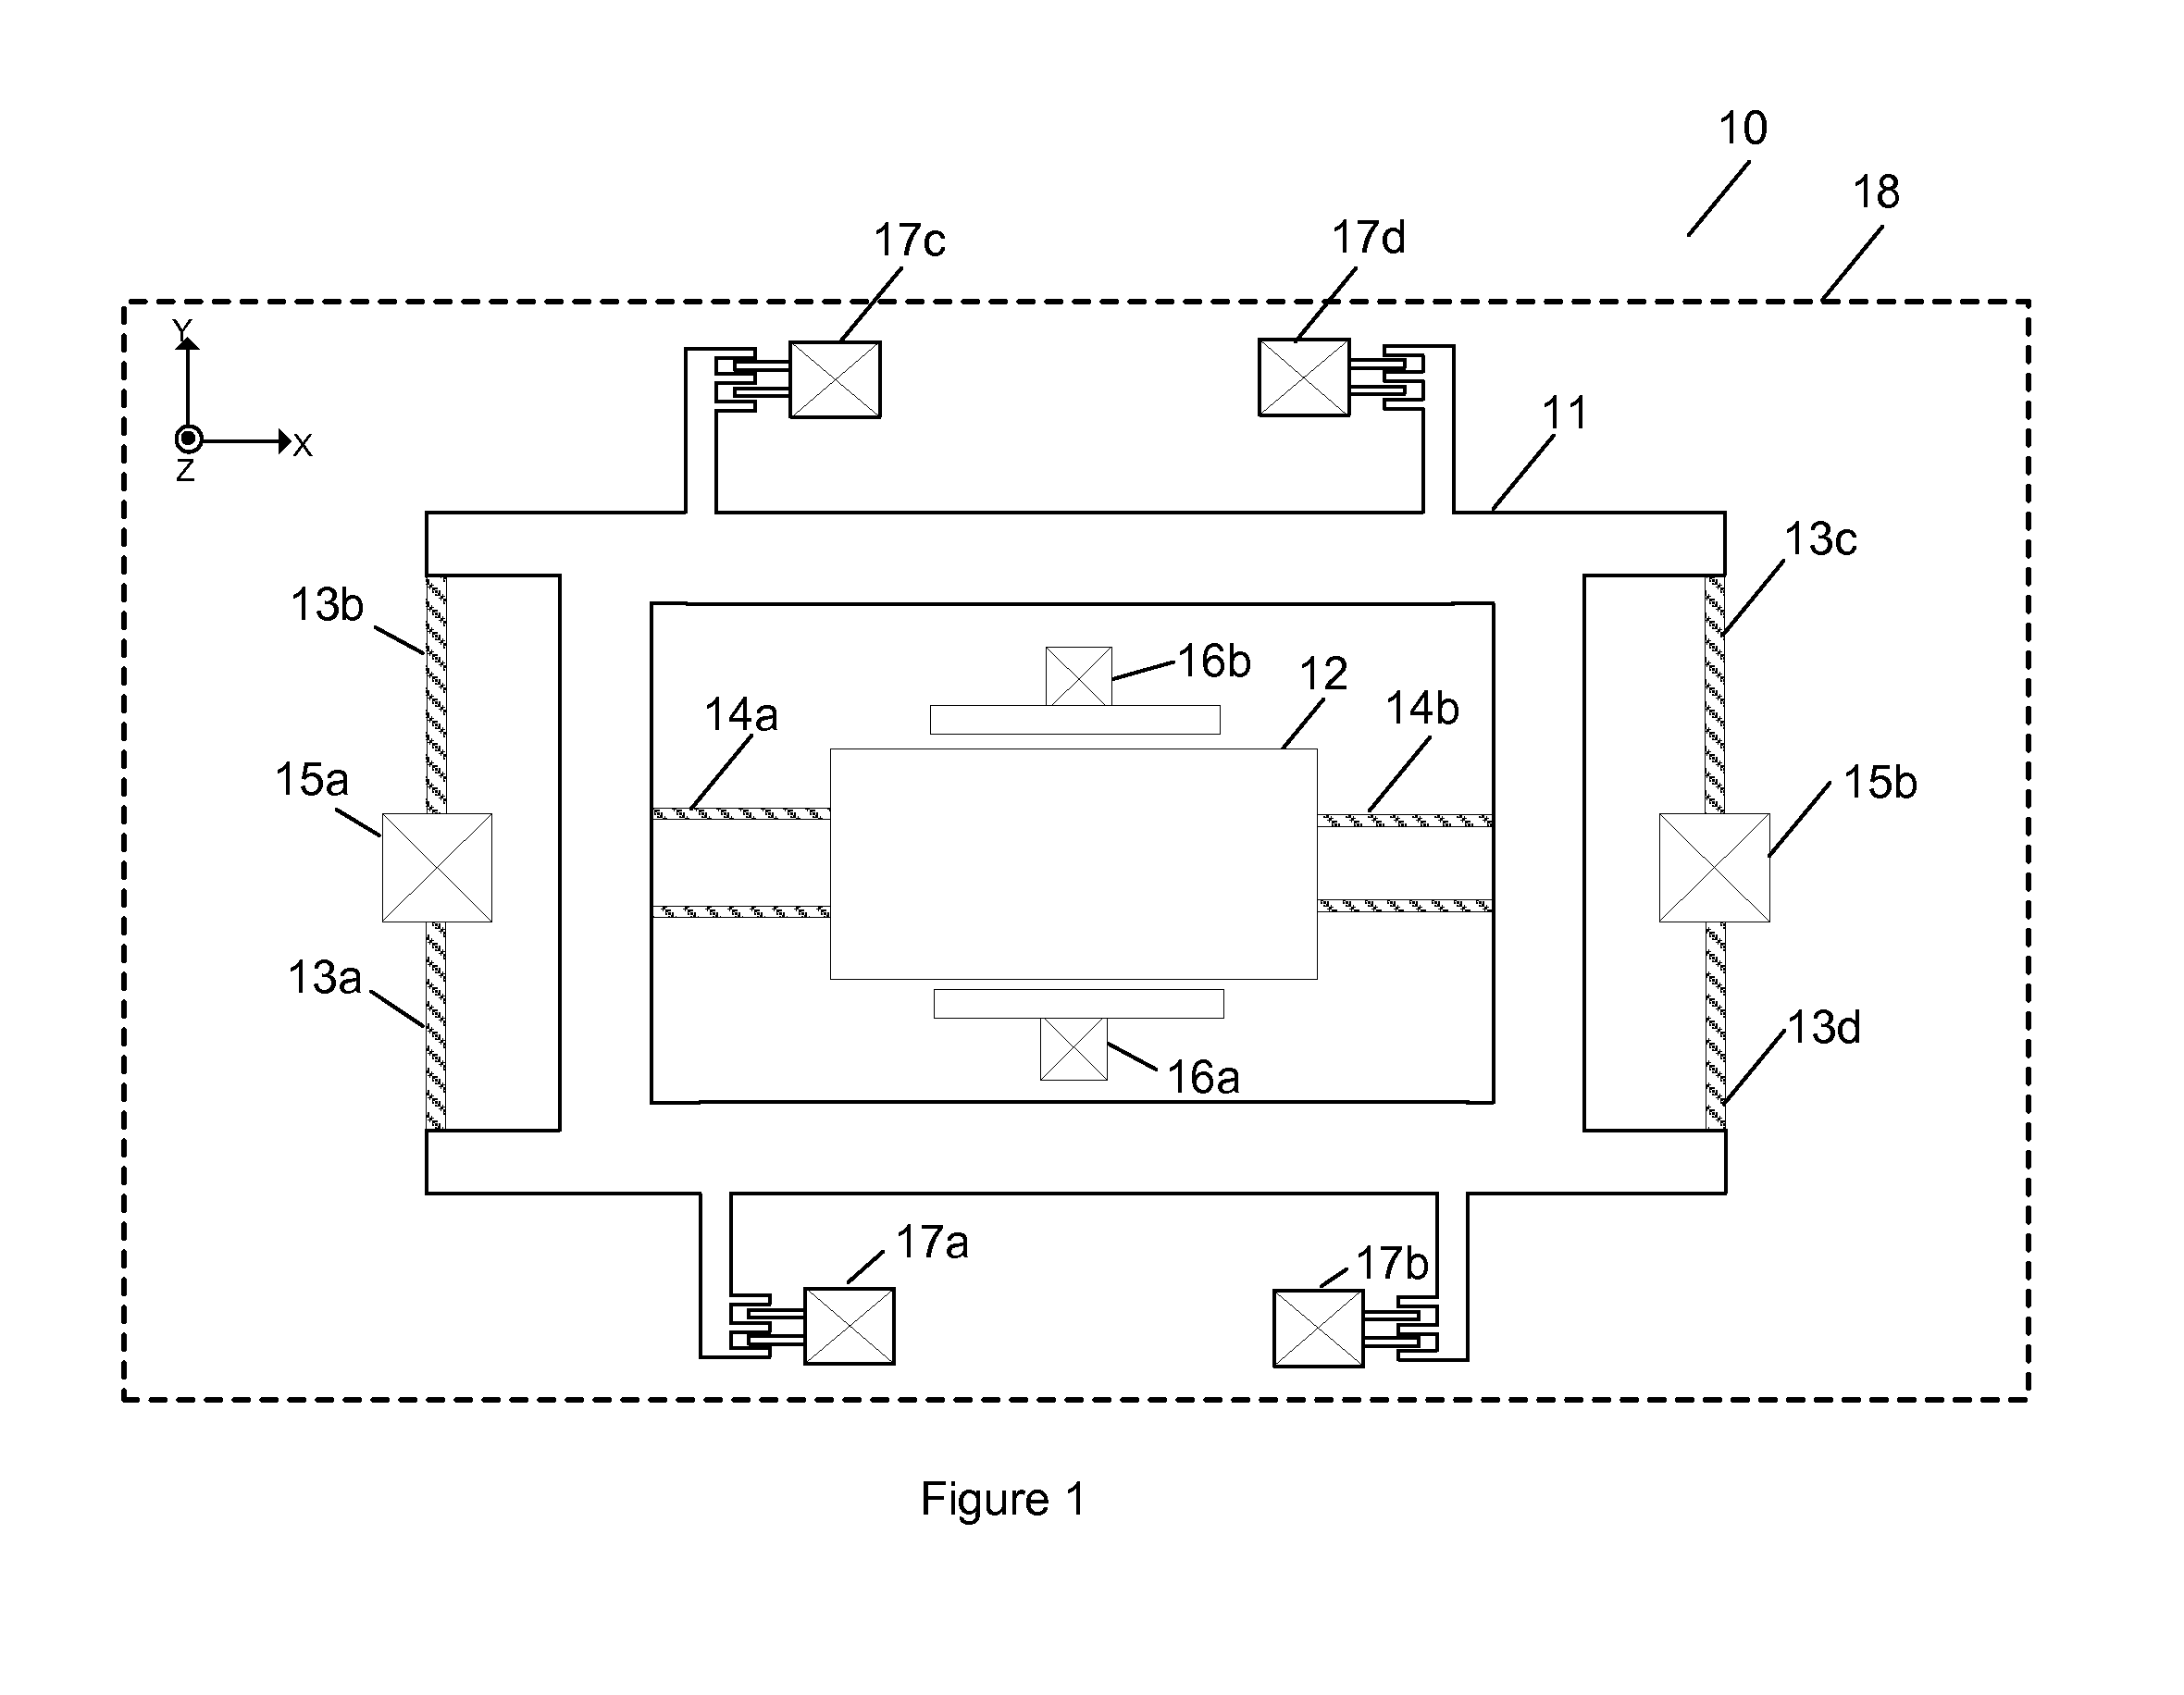 MEMS device with improved spring system